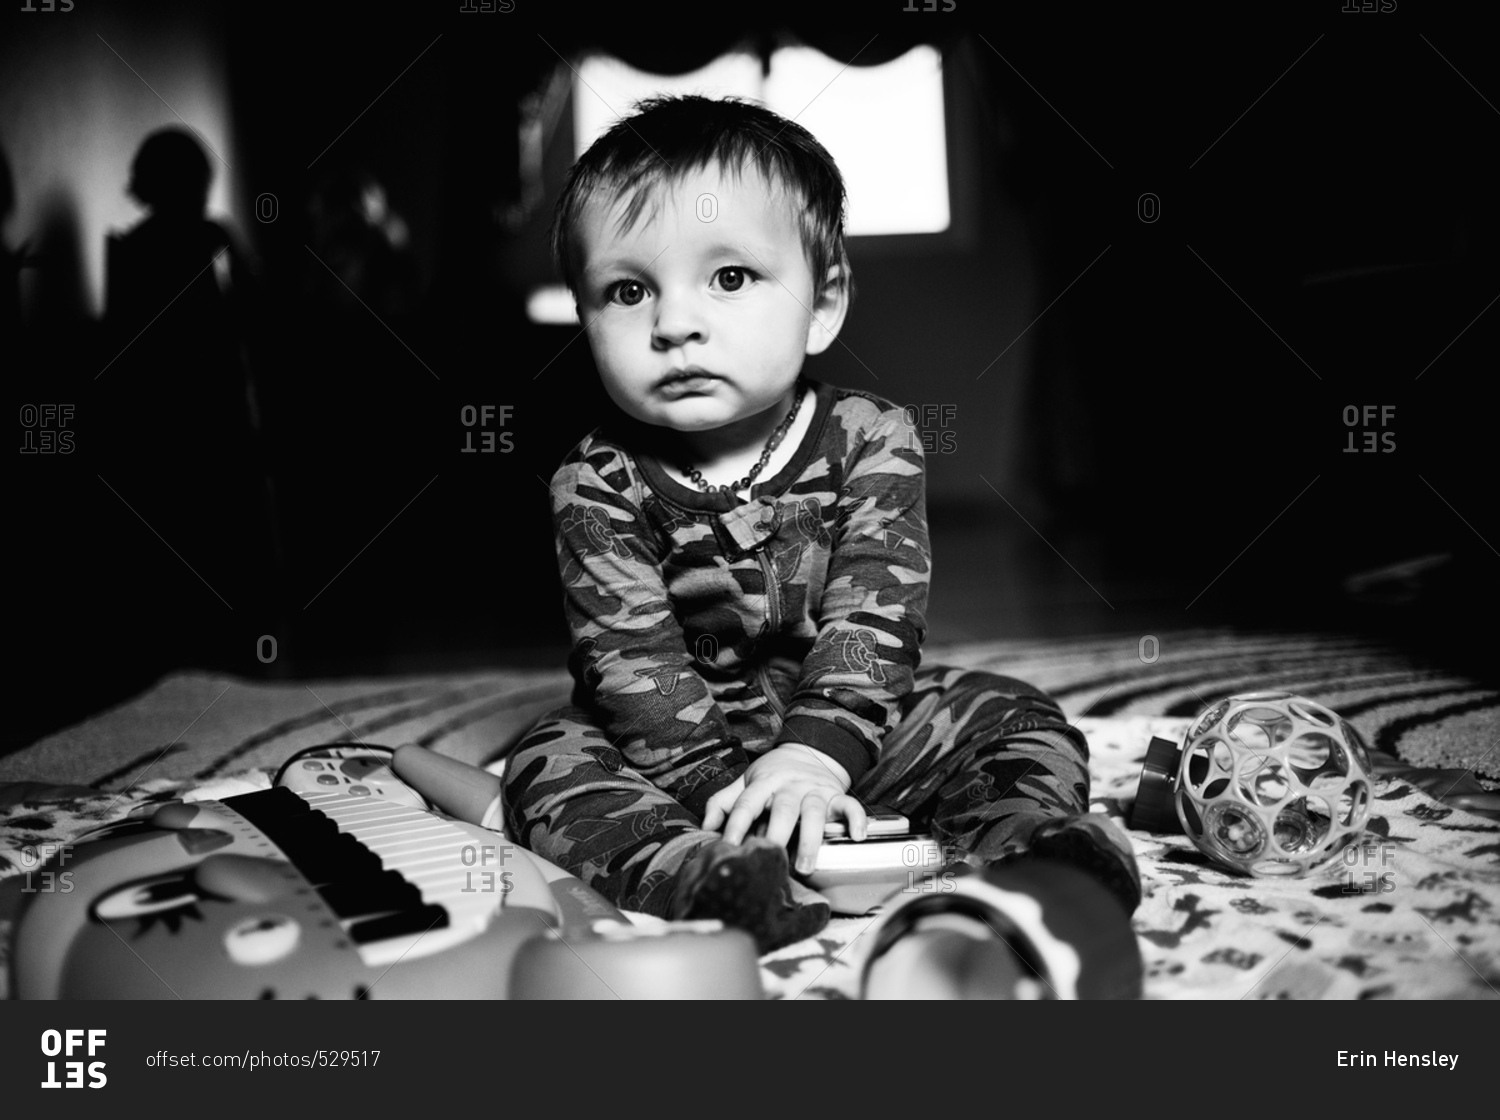 Toddler on floor in high contrast photo